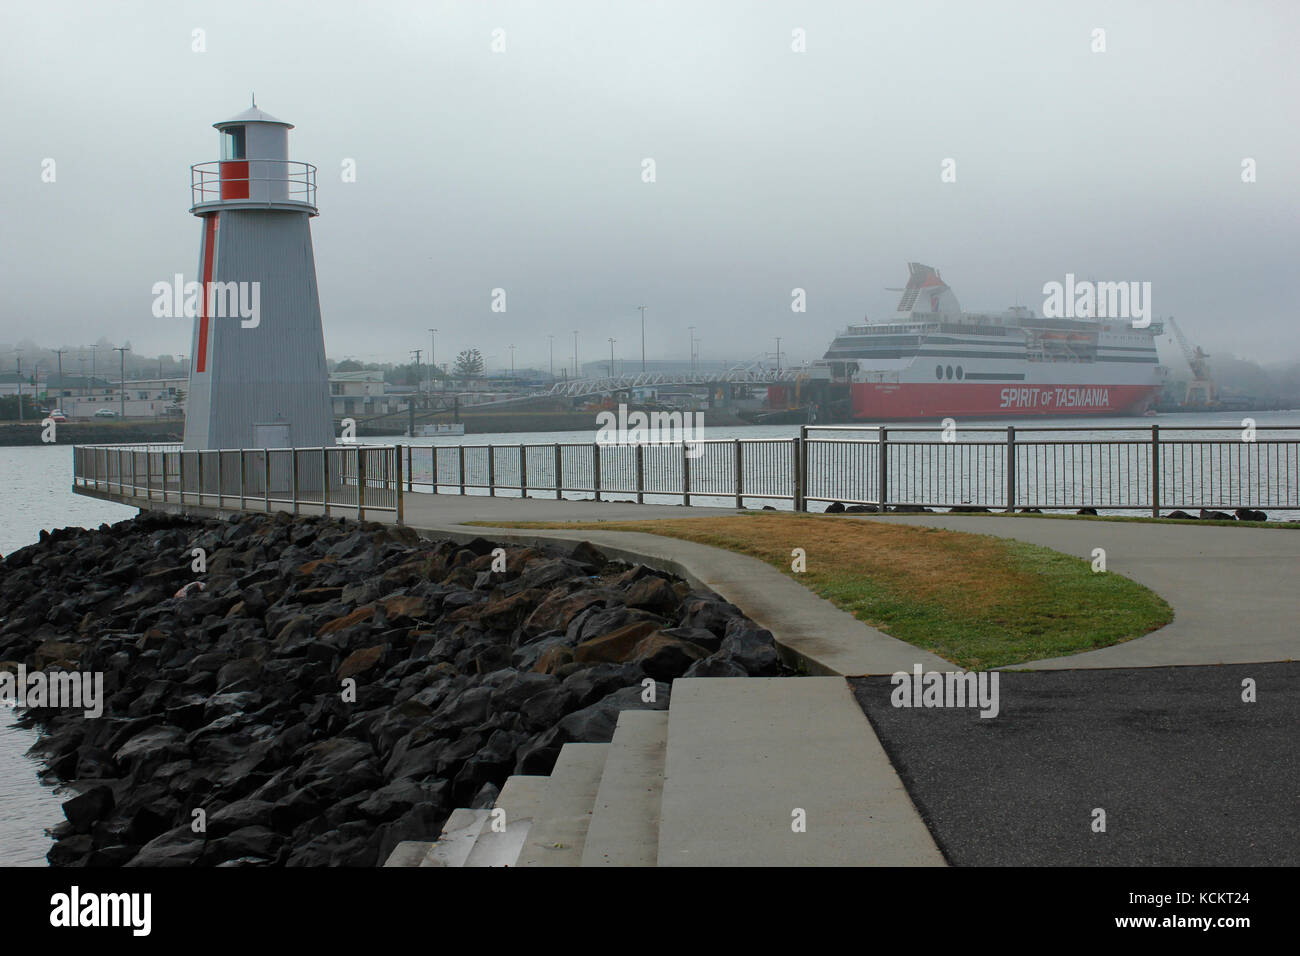 Navigation marker for boats entering the port on a gloomy day, with the Bass Strait ferry ’Spirit of Tasmania’ in the background. Devonport, Tasmania, Stock Photo